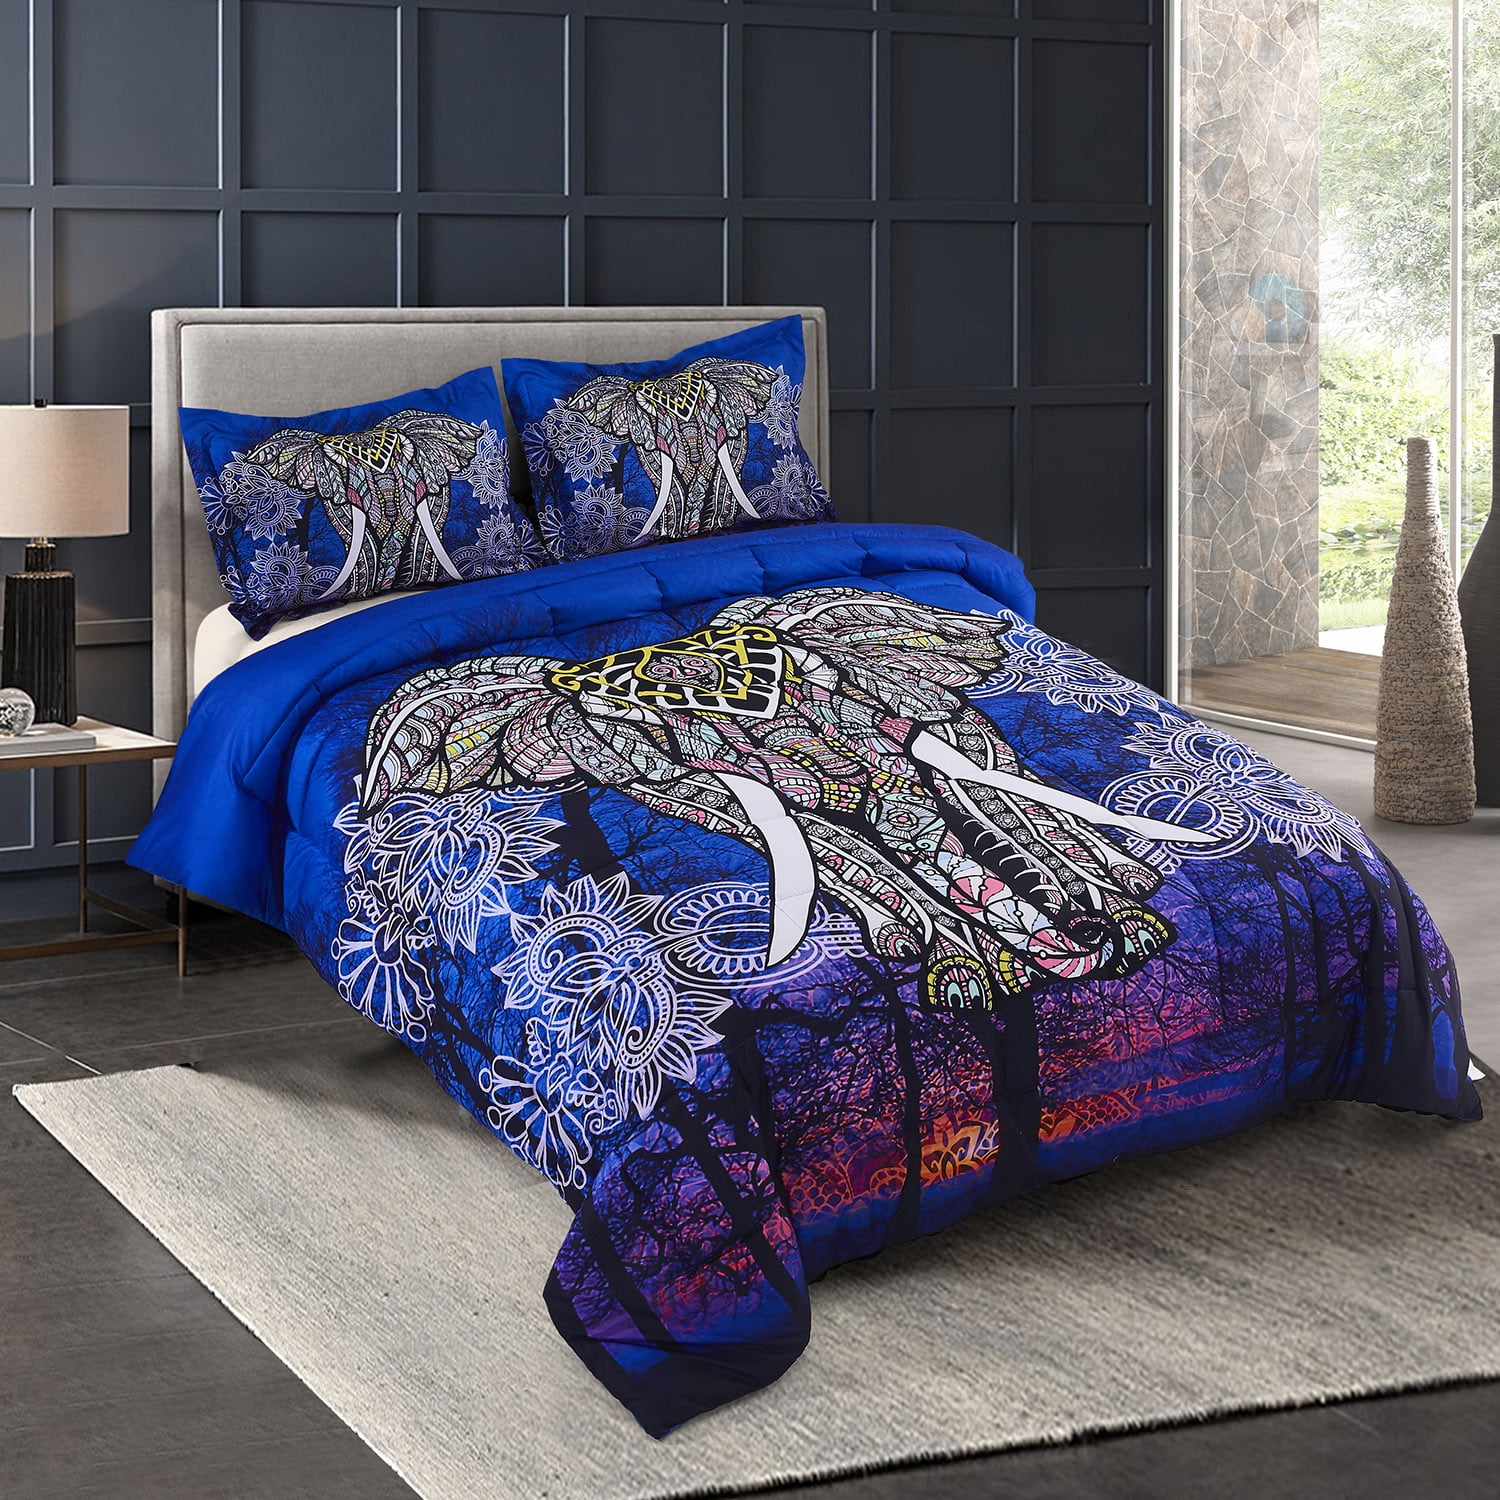 3d Bedding Set 3 Piece Queen Size, Animal Print Comforter Sets For King Size Bed